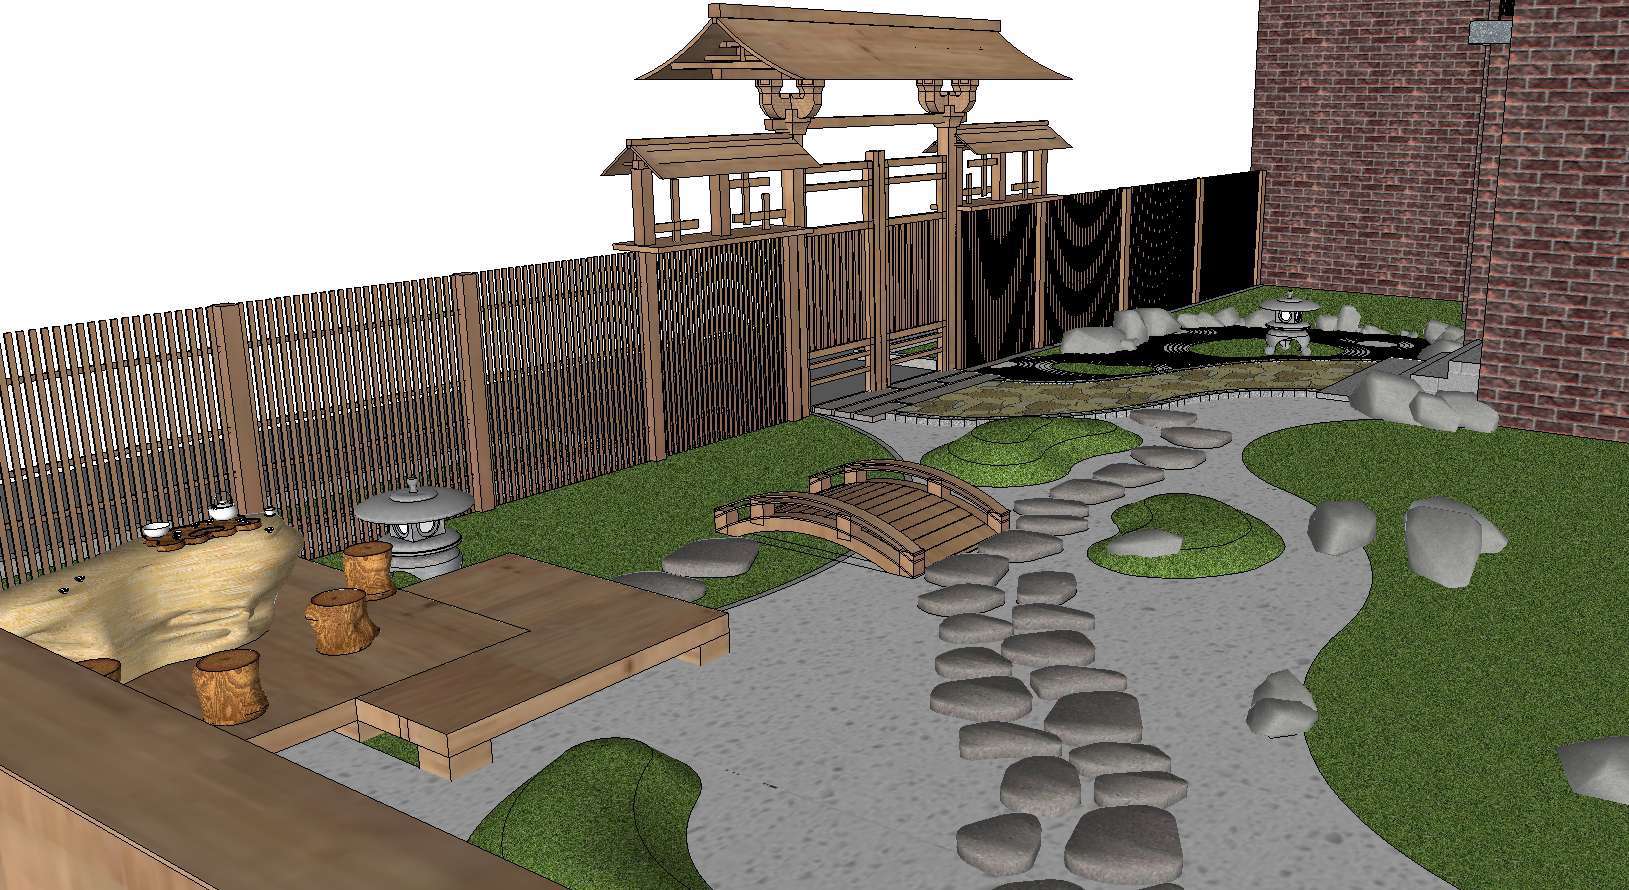 SketchUp Guide for Gardeners